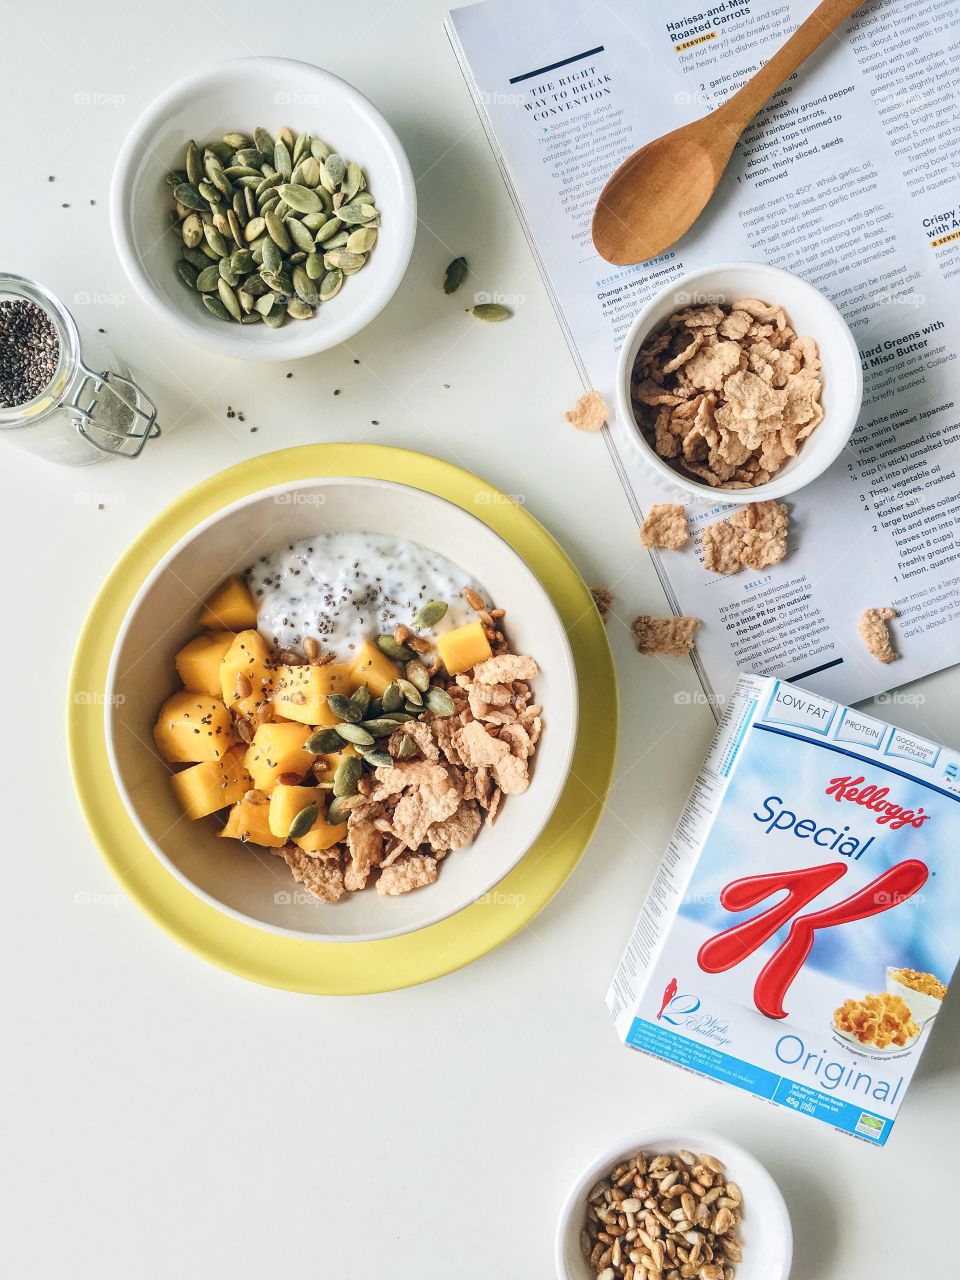 Reimagining cereal : Healthy breakfast bowl with Kellogg's Special K chia pudding and mango.
(Ingredients : Kellogg's Special K, yogurt, chia seed and mango top with pumpkin seeds and sunflower kernels )
